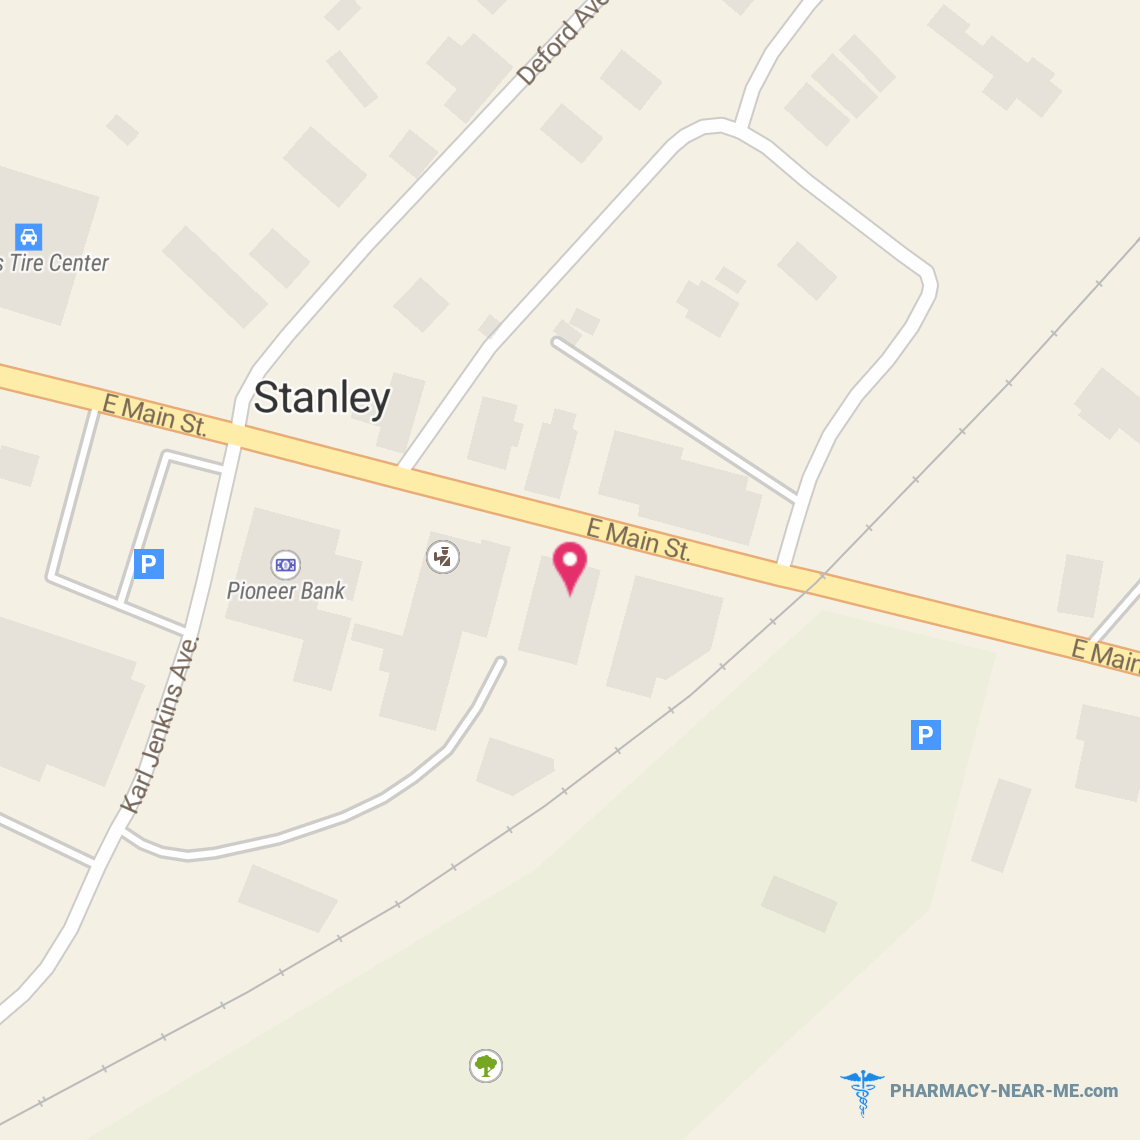 STANLEY PHARMACY, INC - Pharmacy Hours, Phone, Reviews & Information: 308 East Main Street, Stanley, Virginia 22851, United States